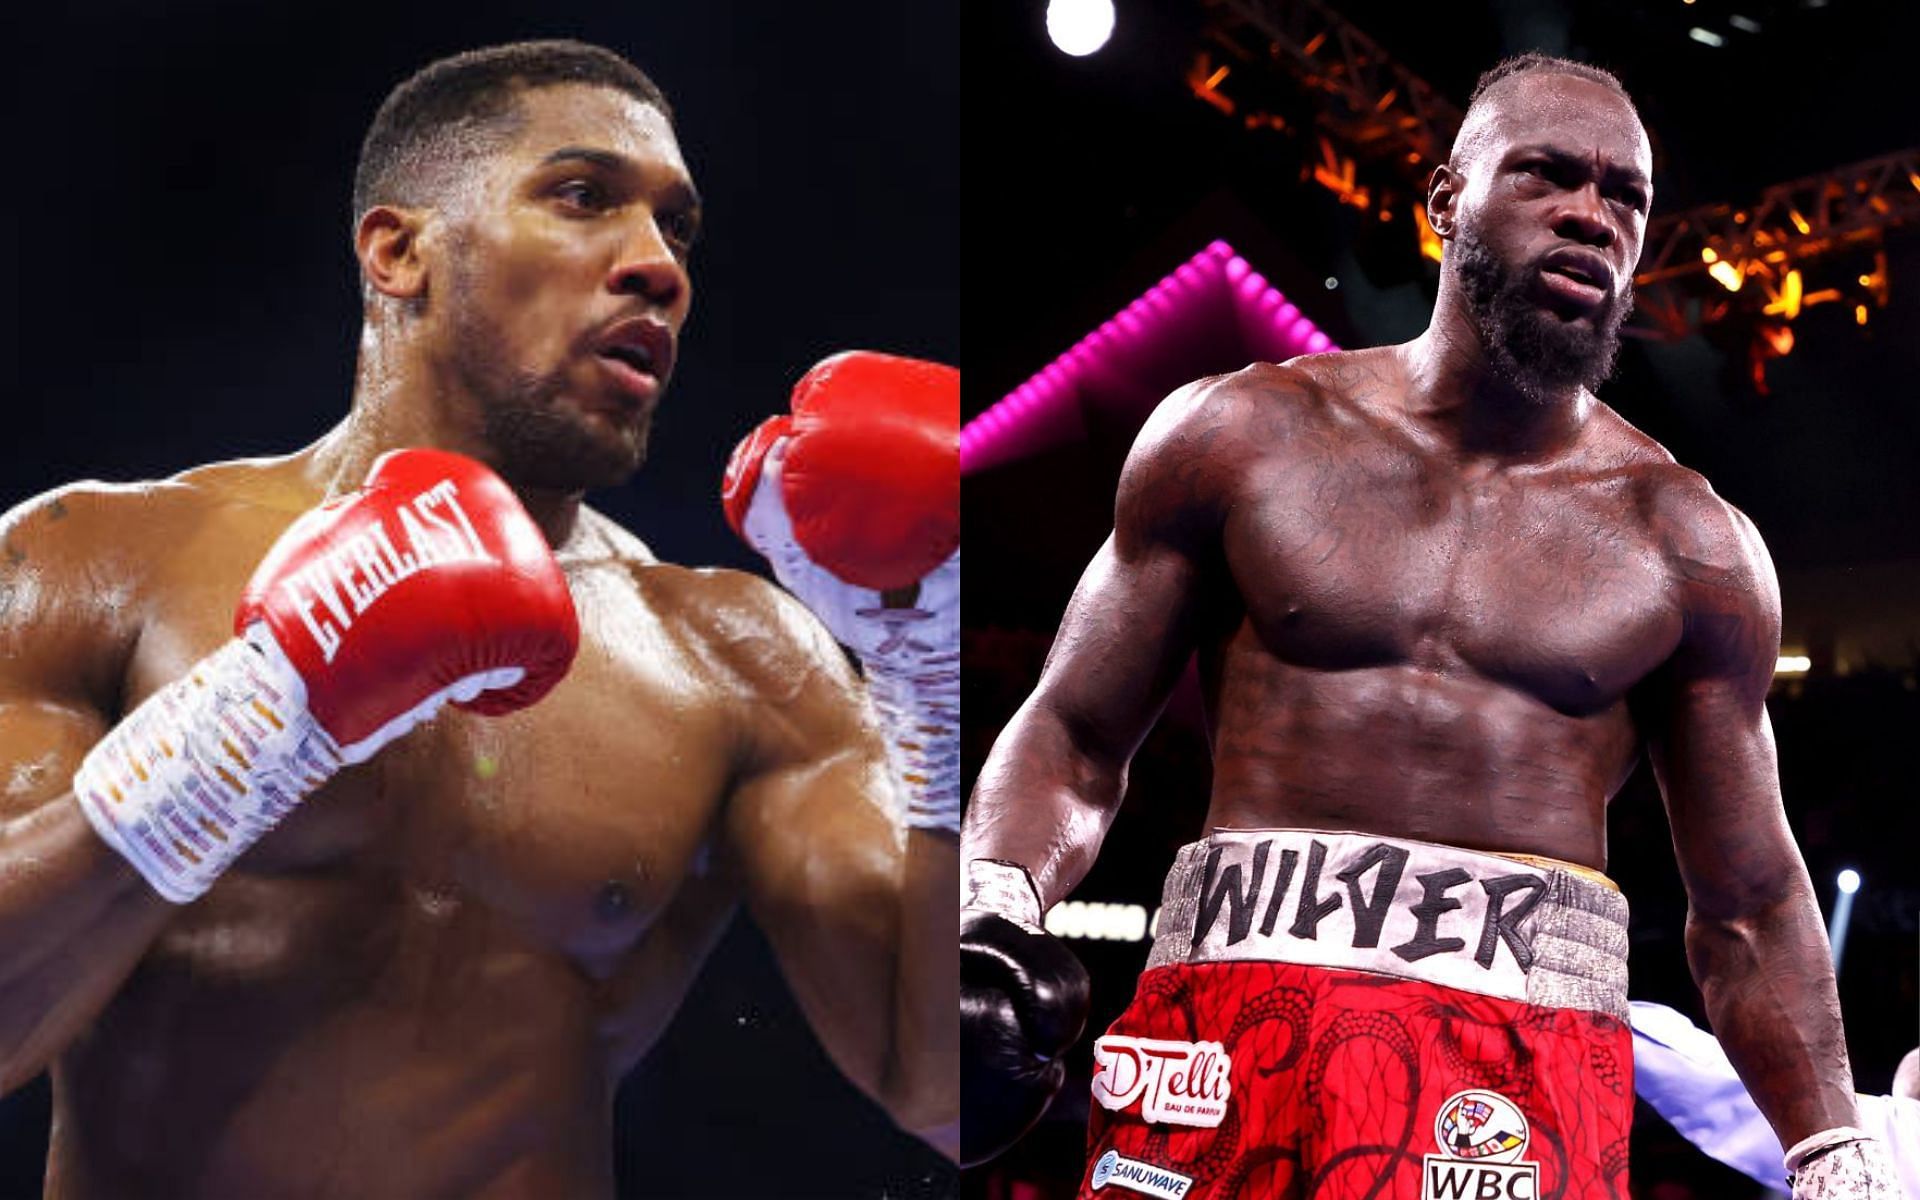 Anthony Joshua (left) and Deontay Wilder (right) [Images Courtesy: @GettyImages]